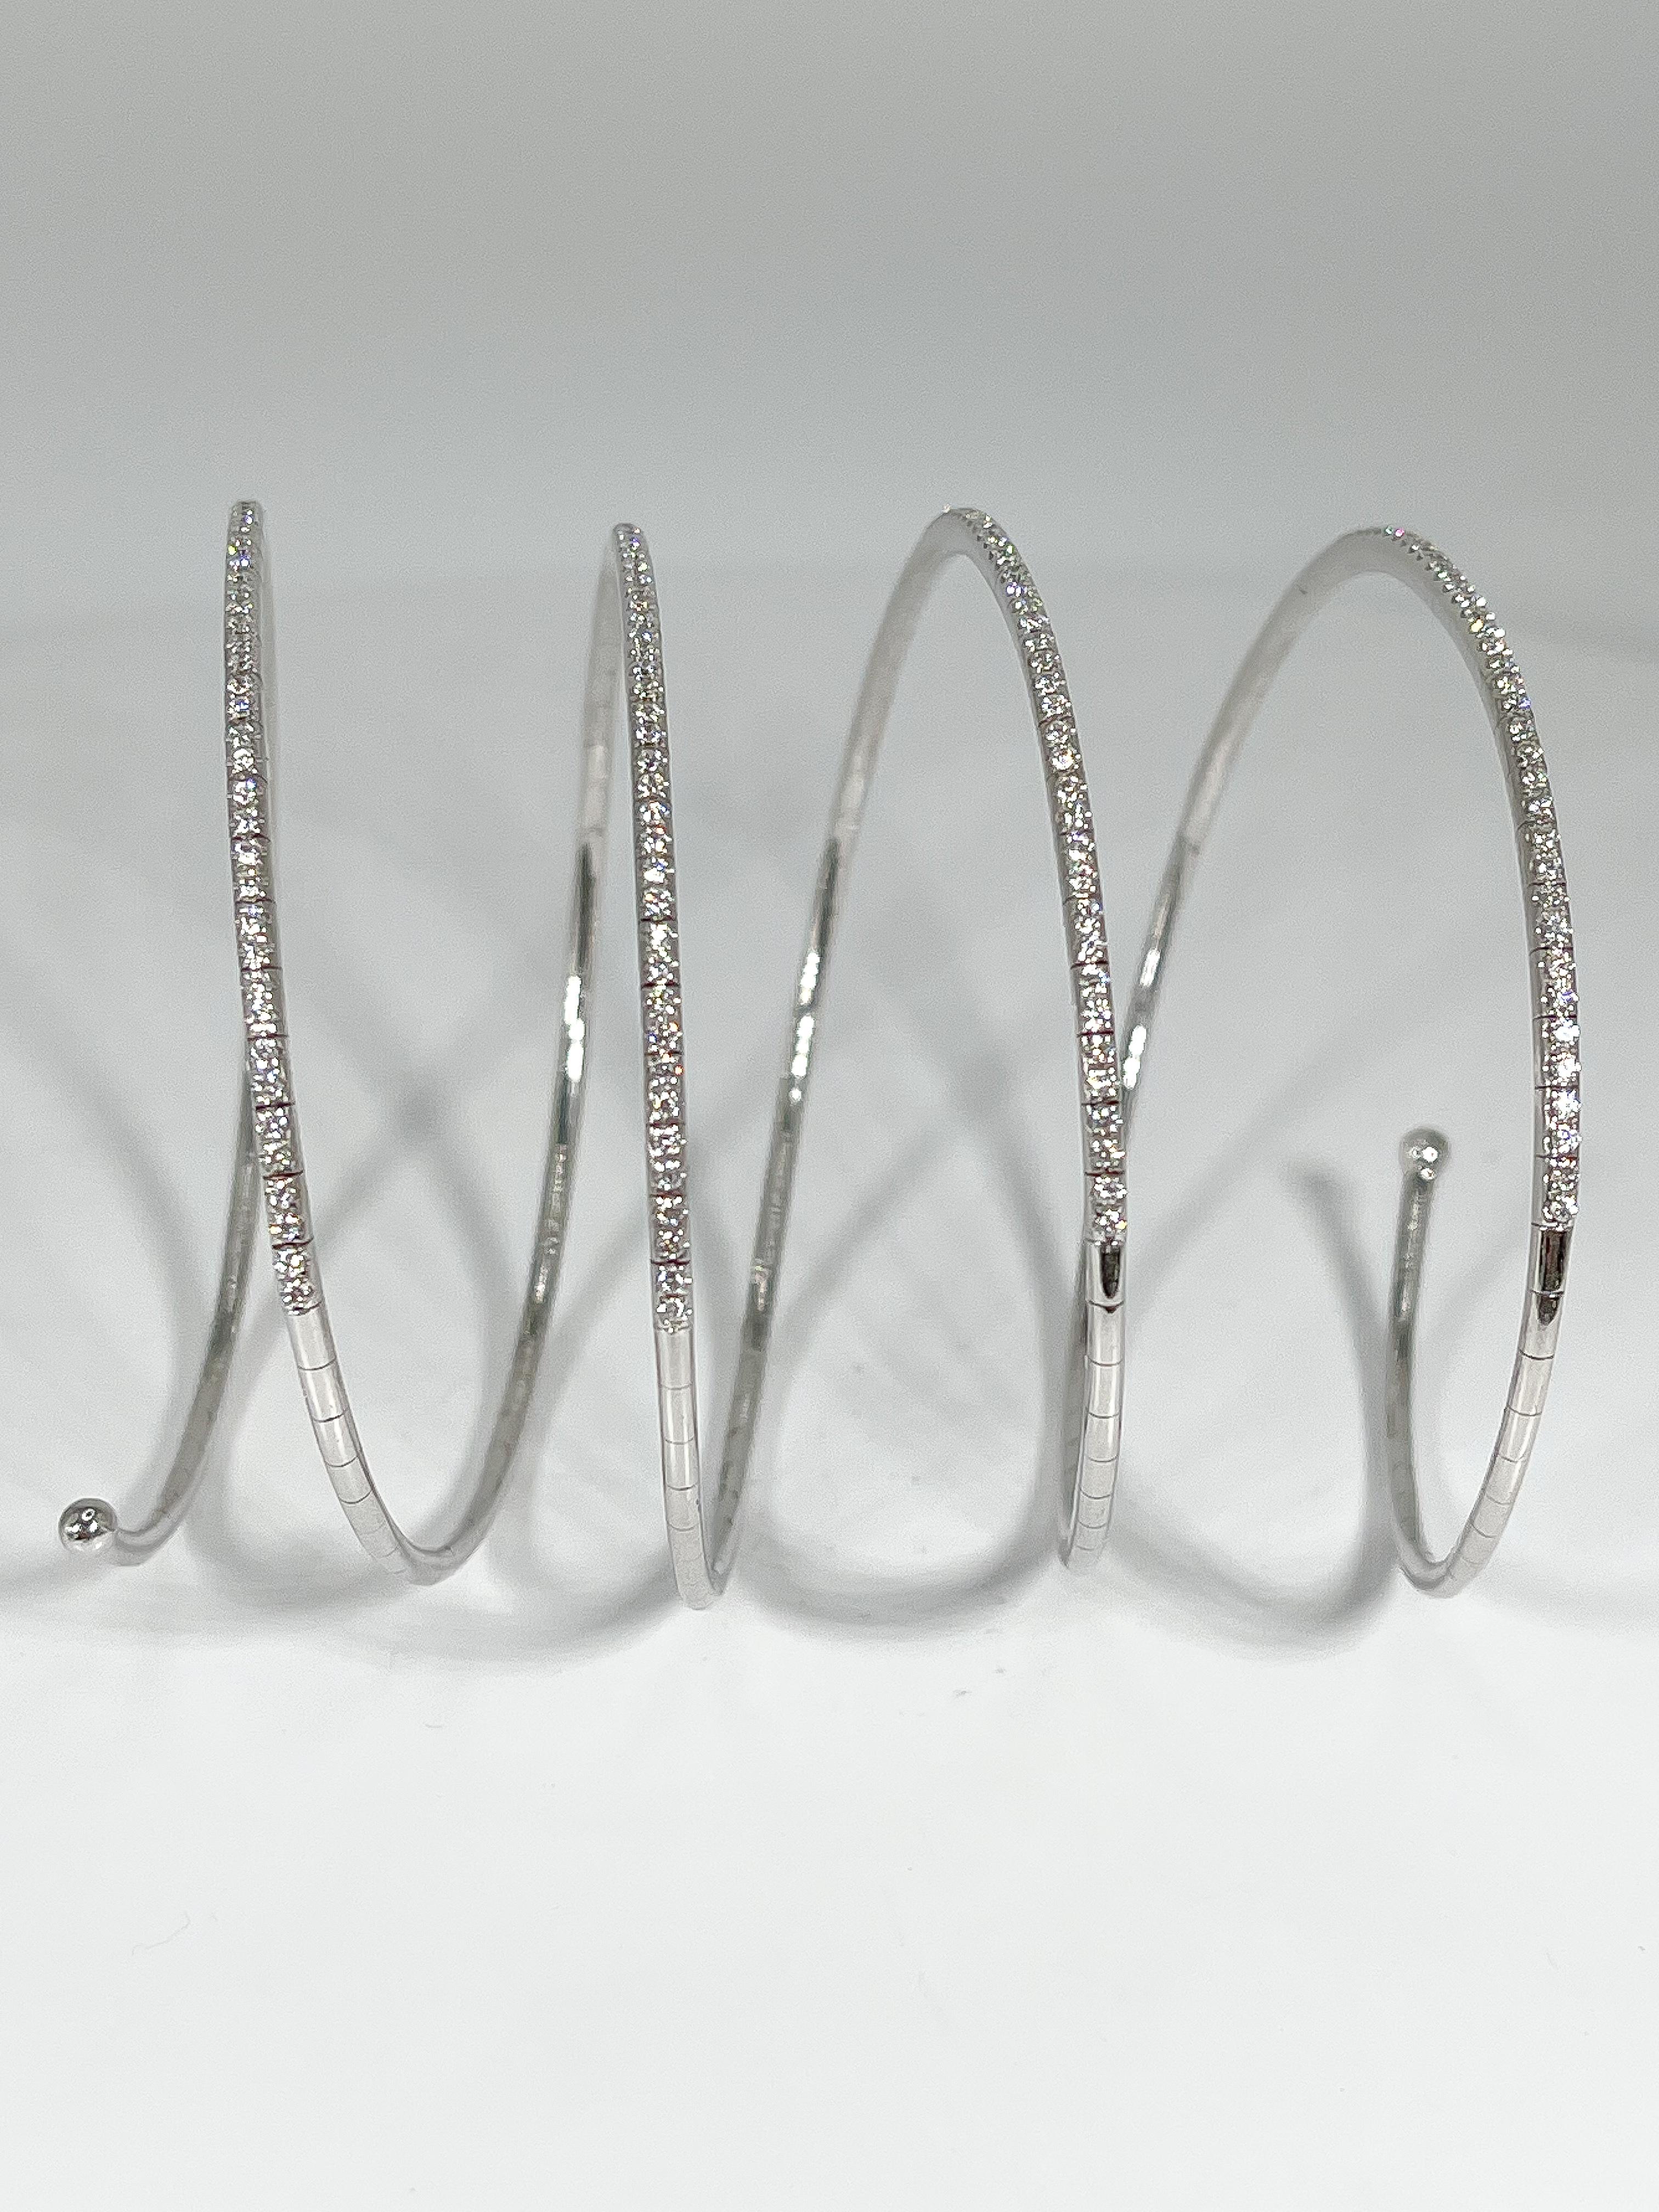 This 18k white gold spiral bangle is enhanced with 208 round cut diamonds (1.50 CTW) This beautiful bracelet stretches to fit almost any wrist. The width of the individual spirals is 1.7 mm and it has a weight of 23.3 grams.